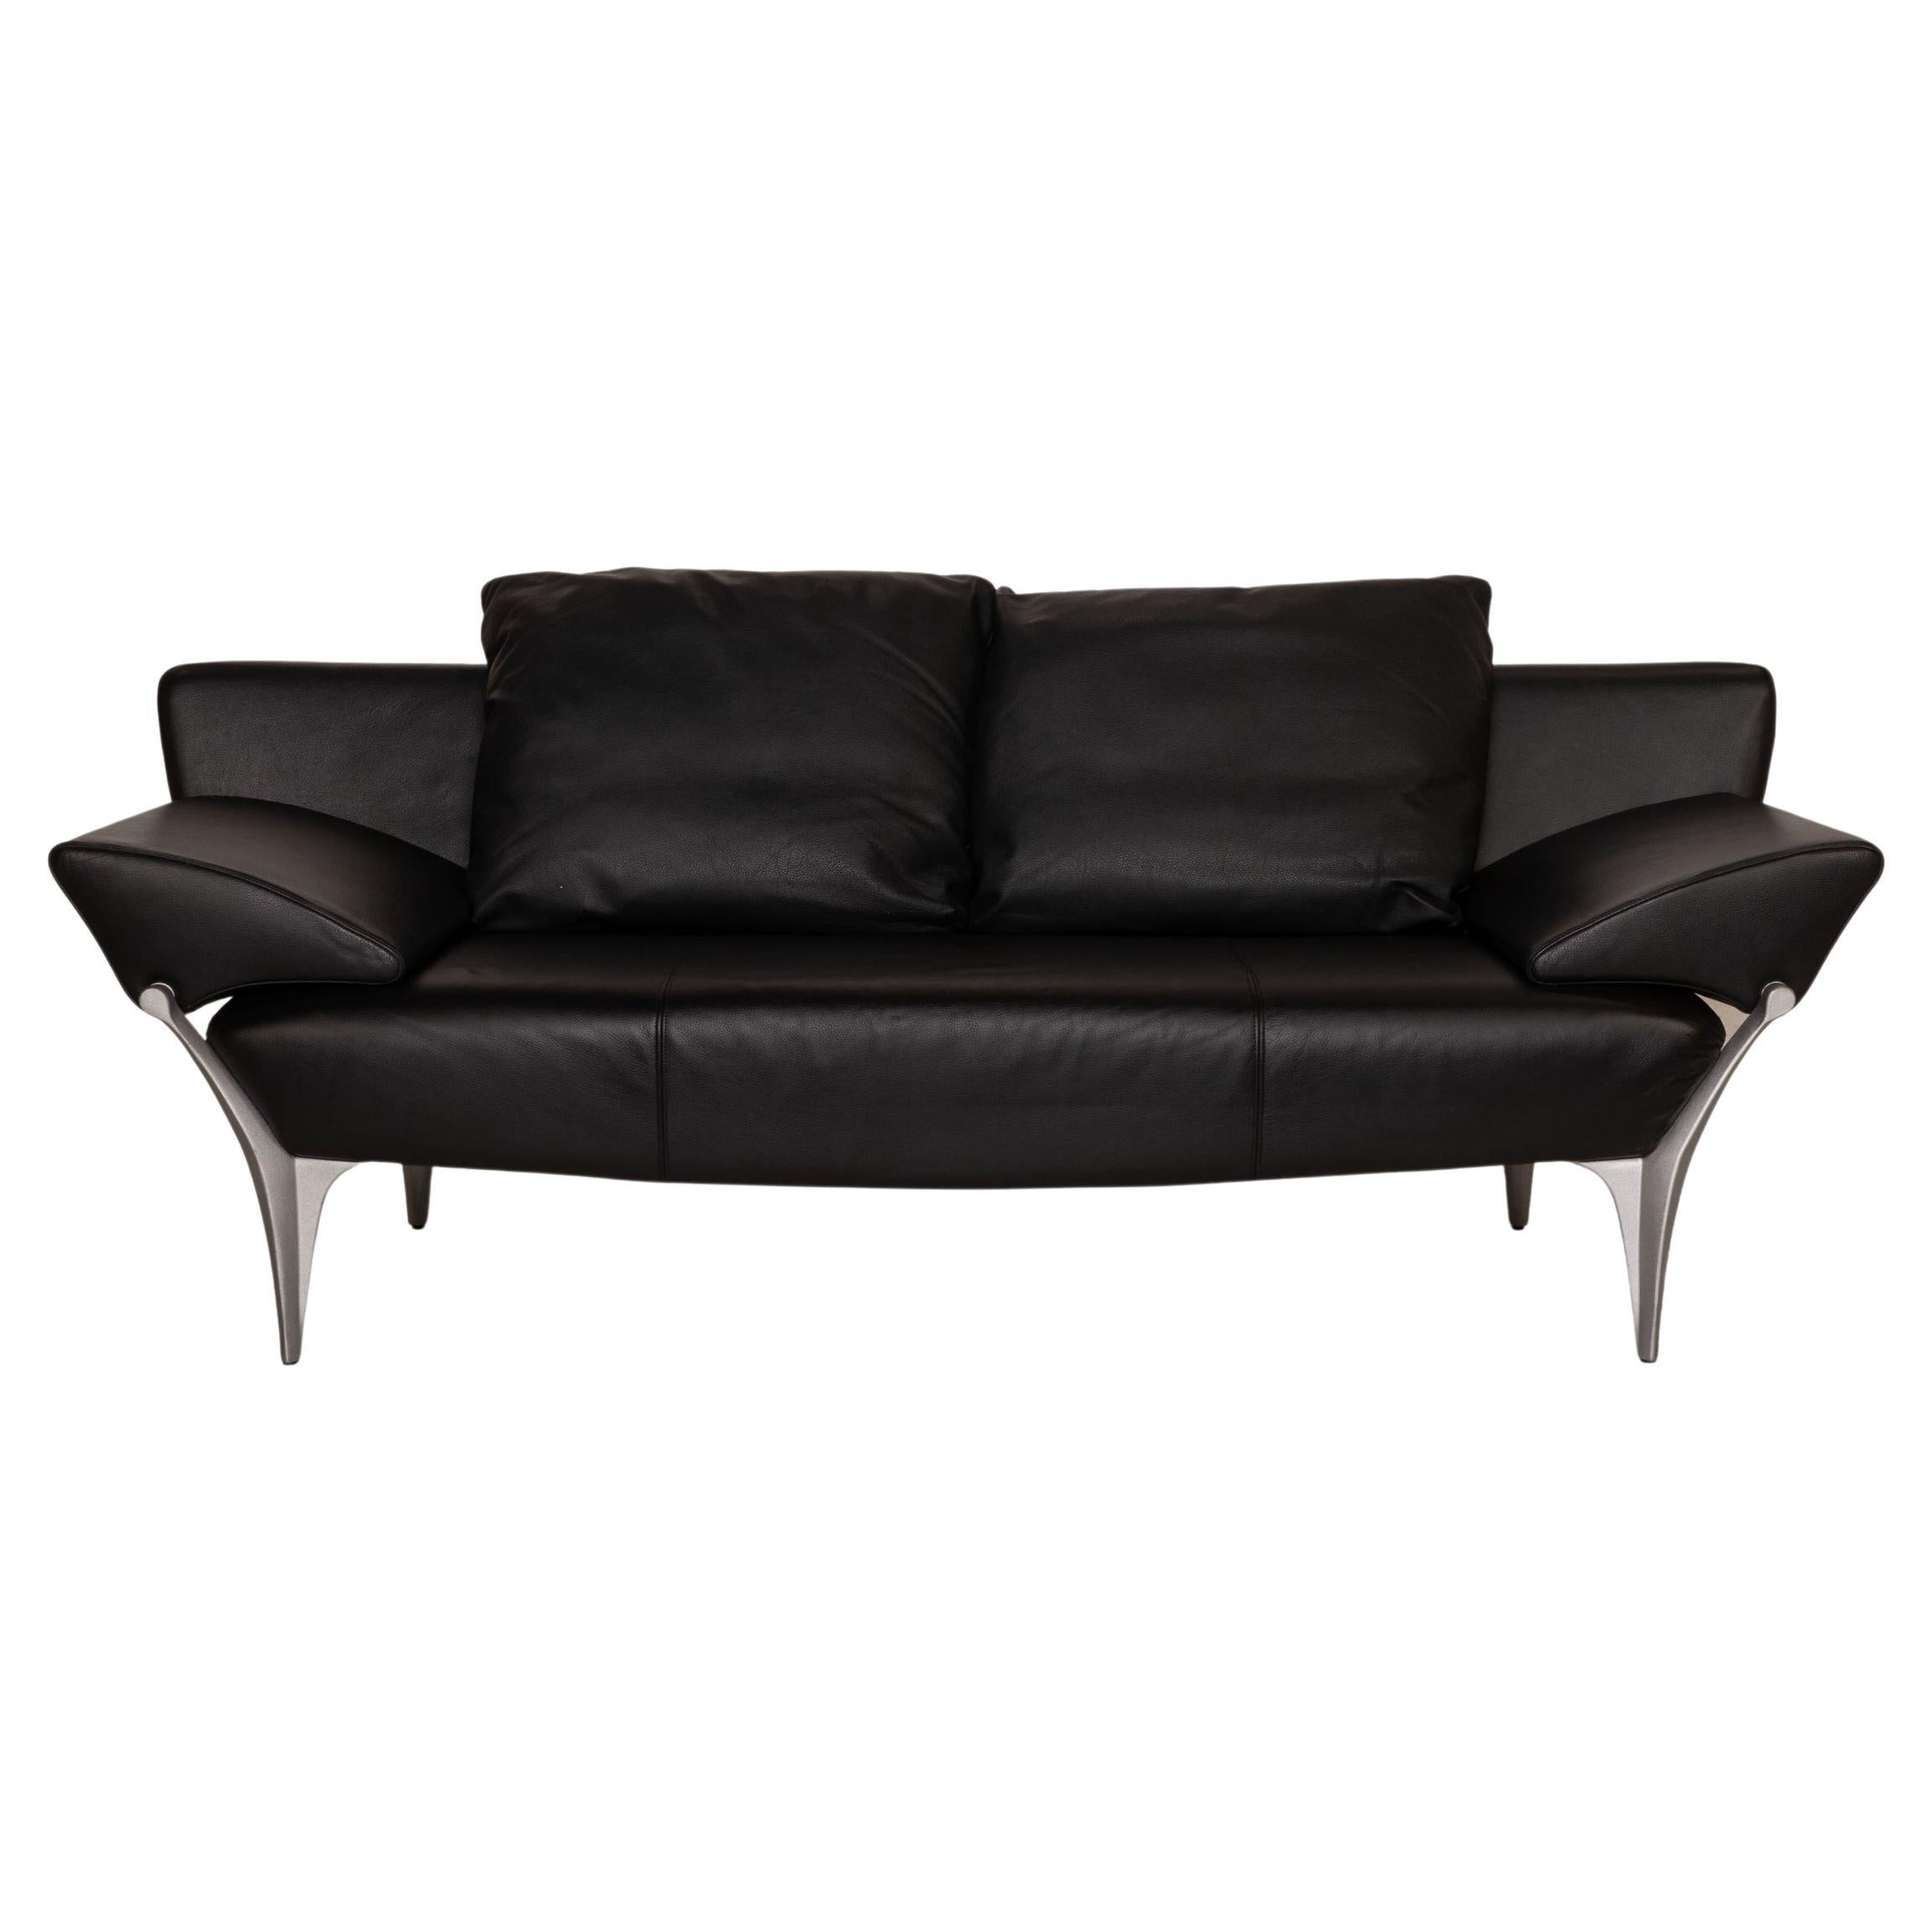 Rolf Benz 1600 Leather Sofa Black Two-Seater Couch Function For Sale